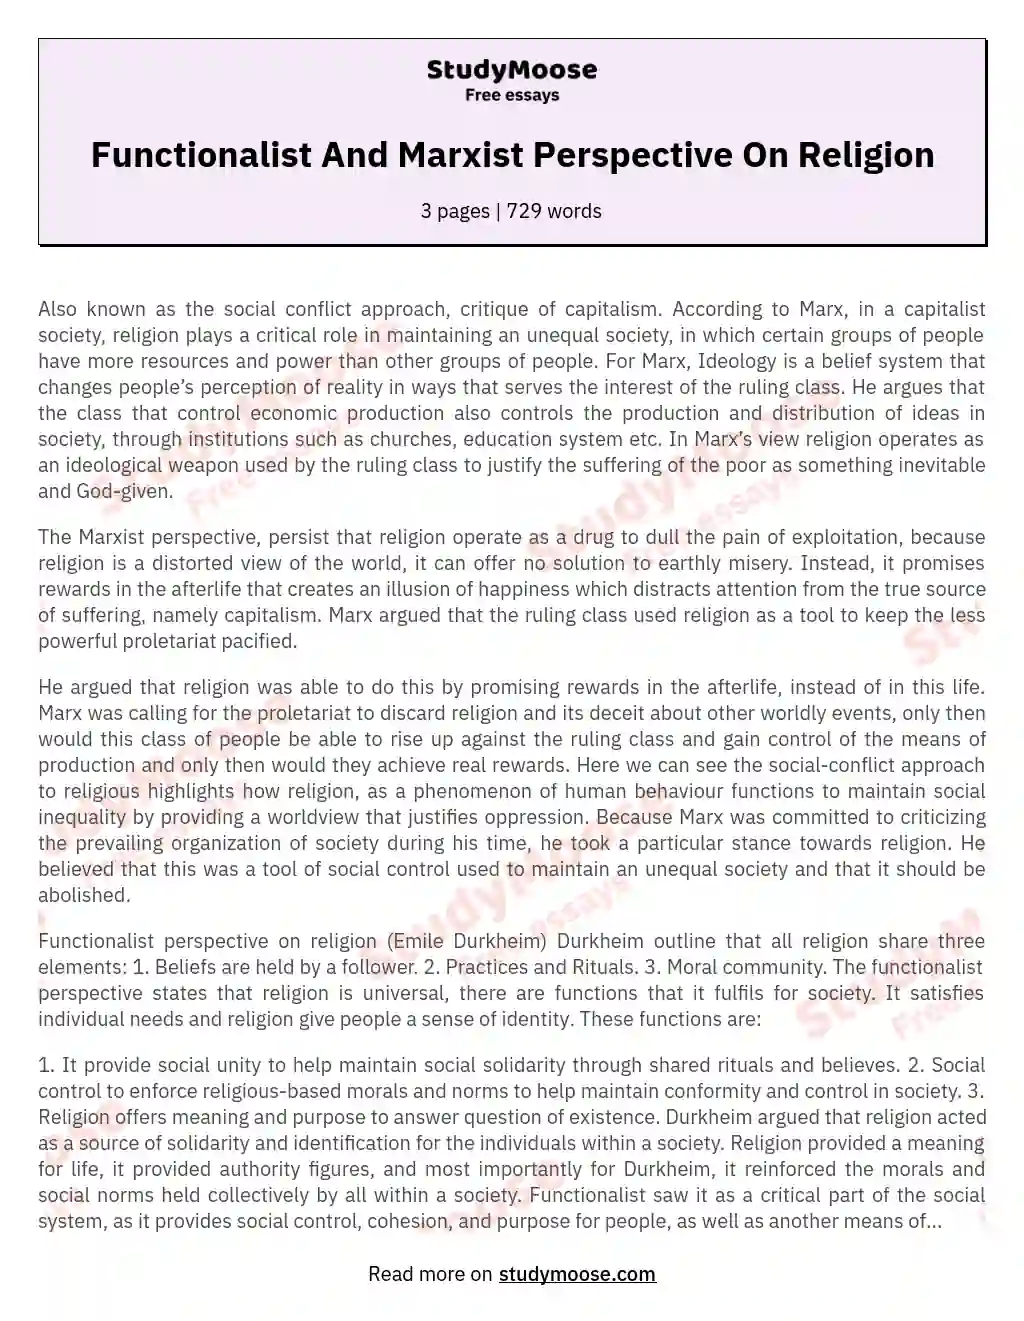 Functionalist And Marxist Perspective On Religion essay